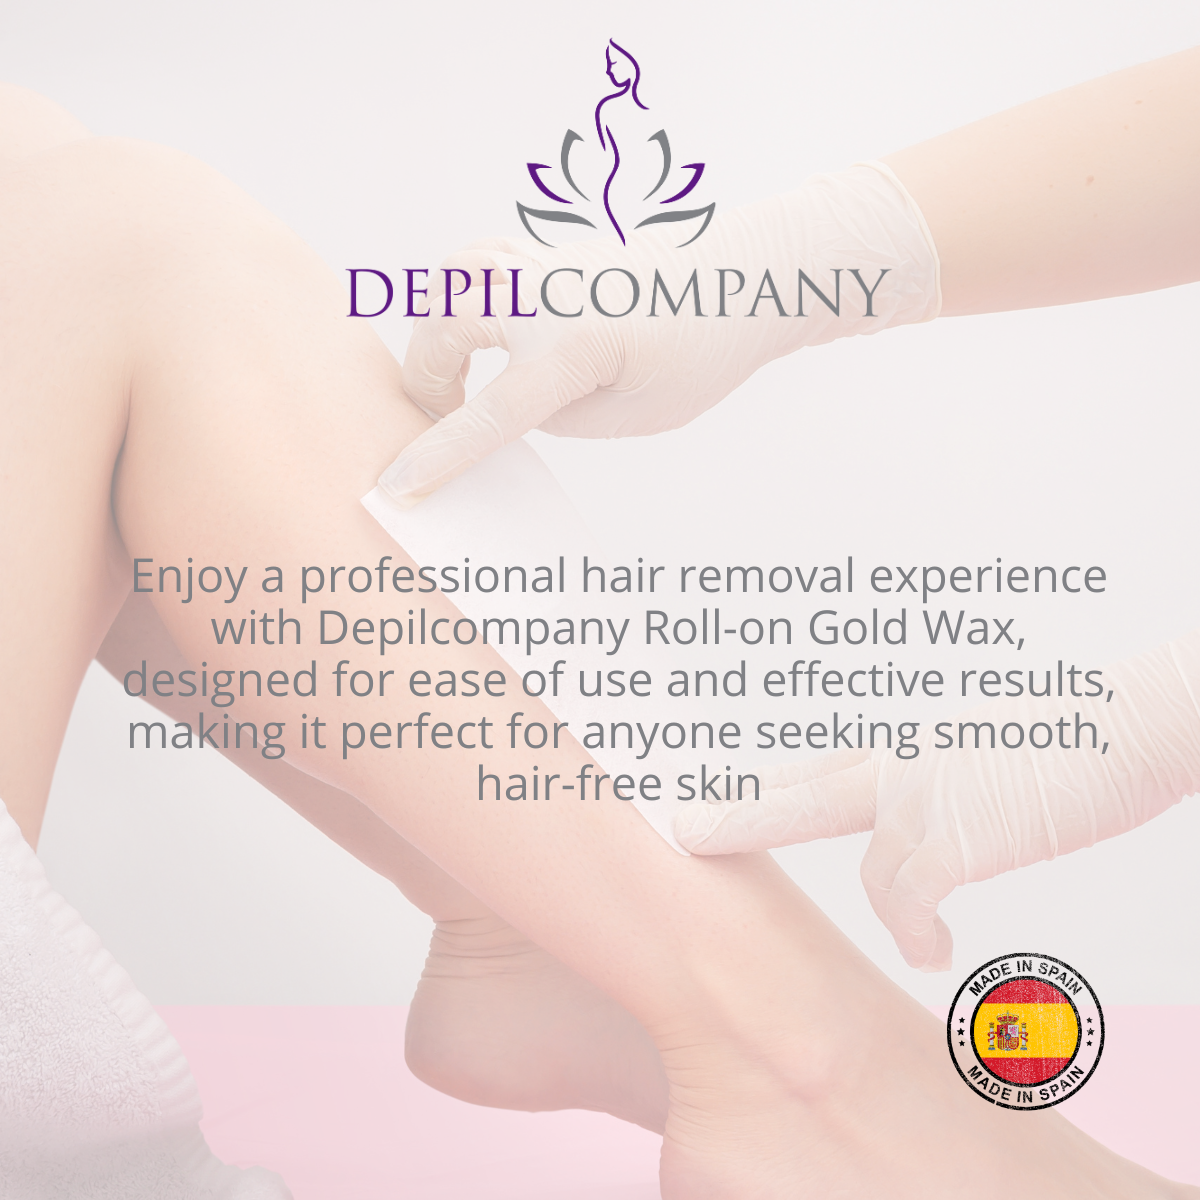 Professional hair removal experience with Depilcompany Roll-on Gold wax, 6 units